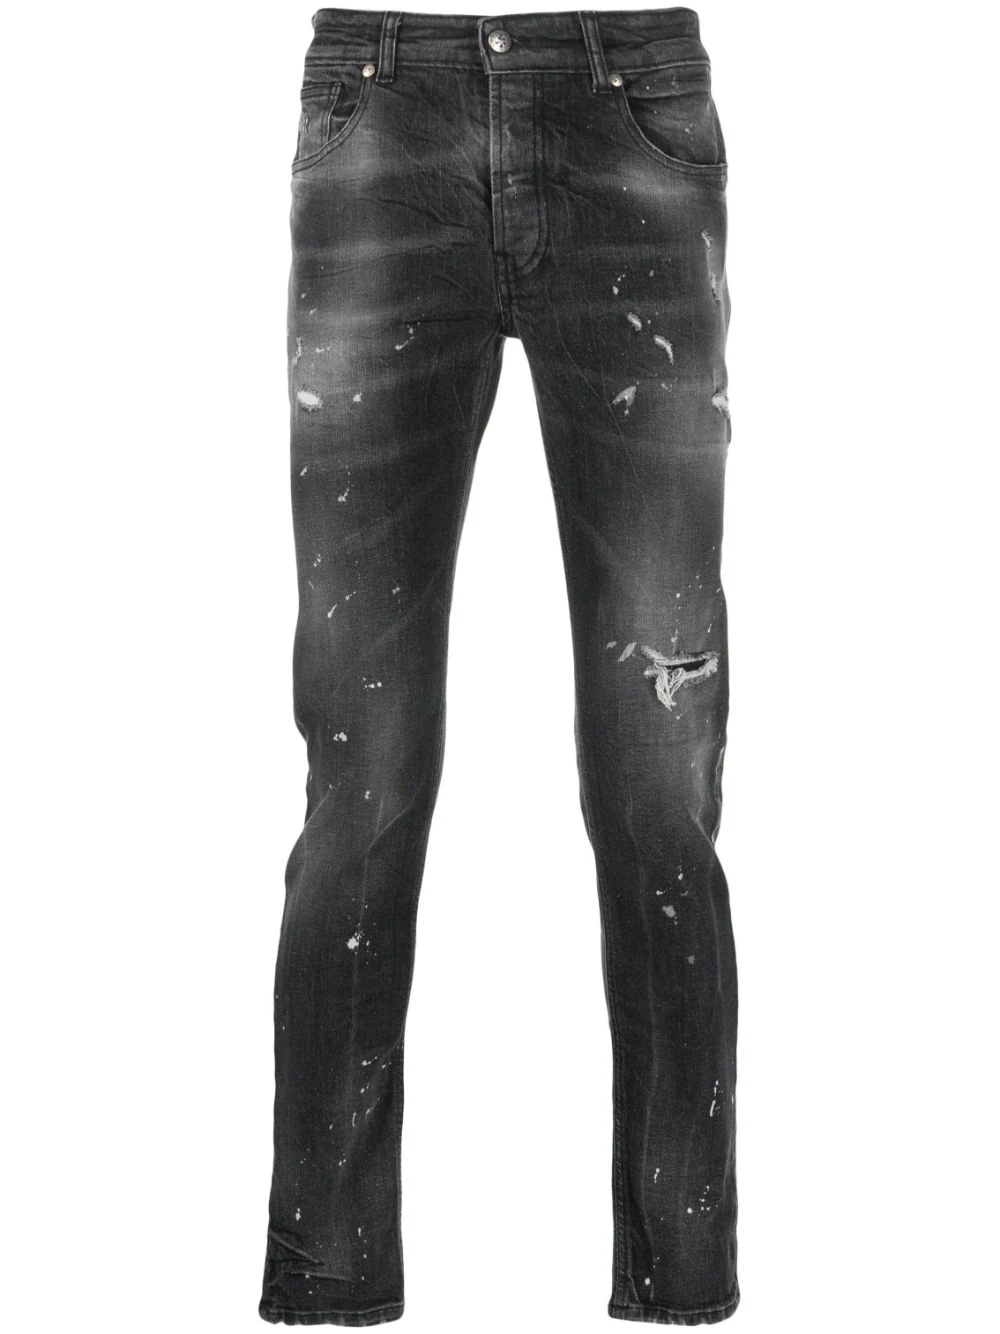 john richmond Iggy skinny jeans with distressed effect available